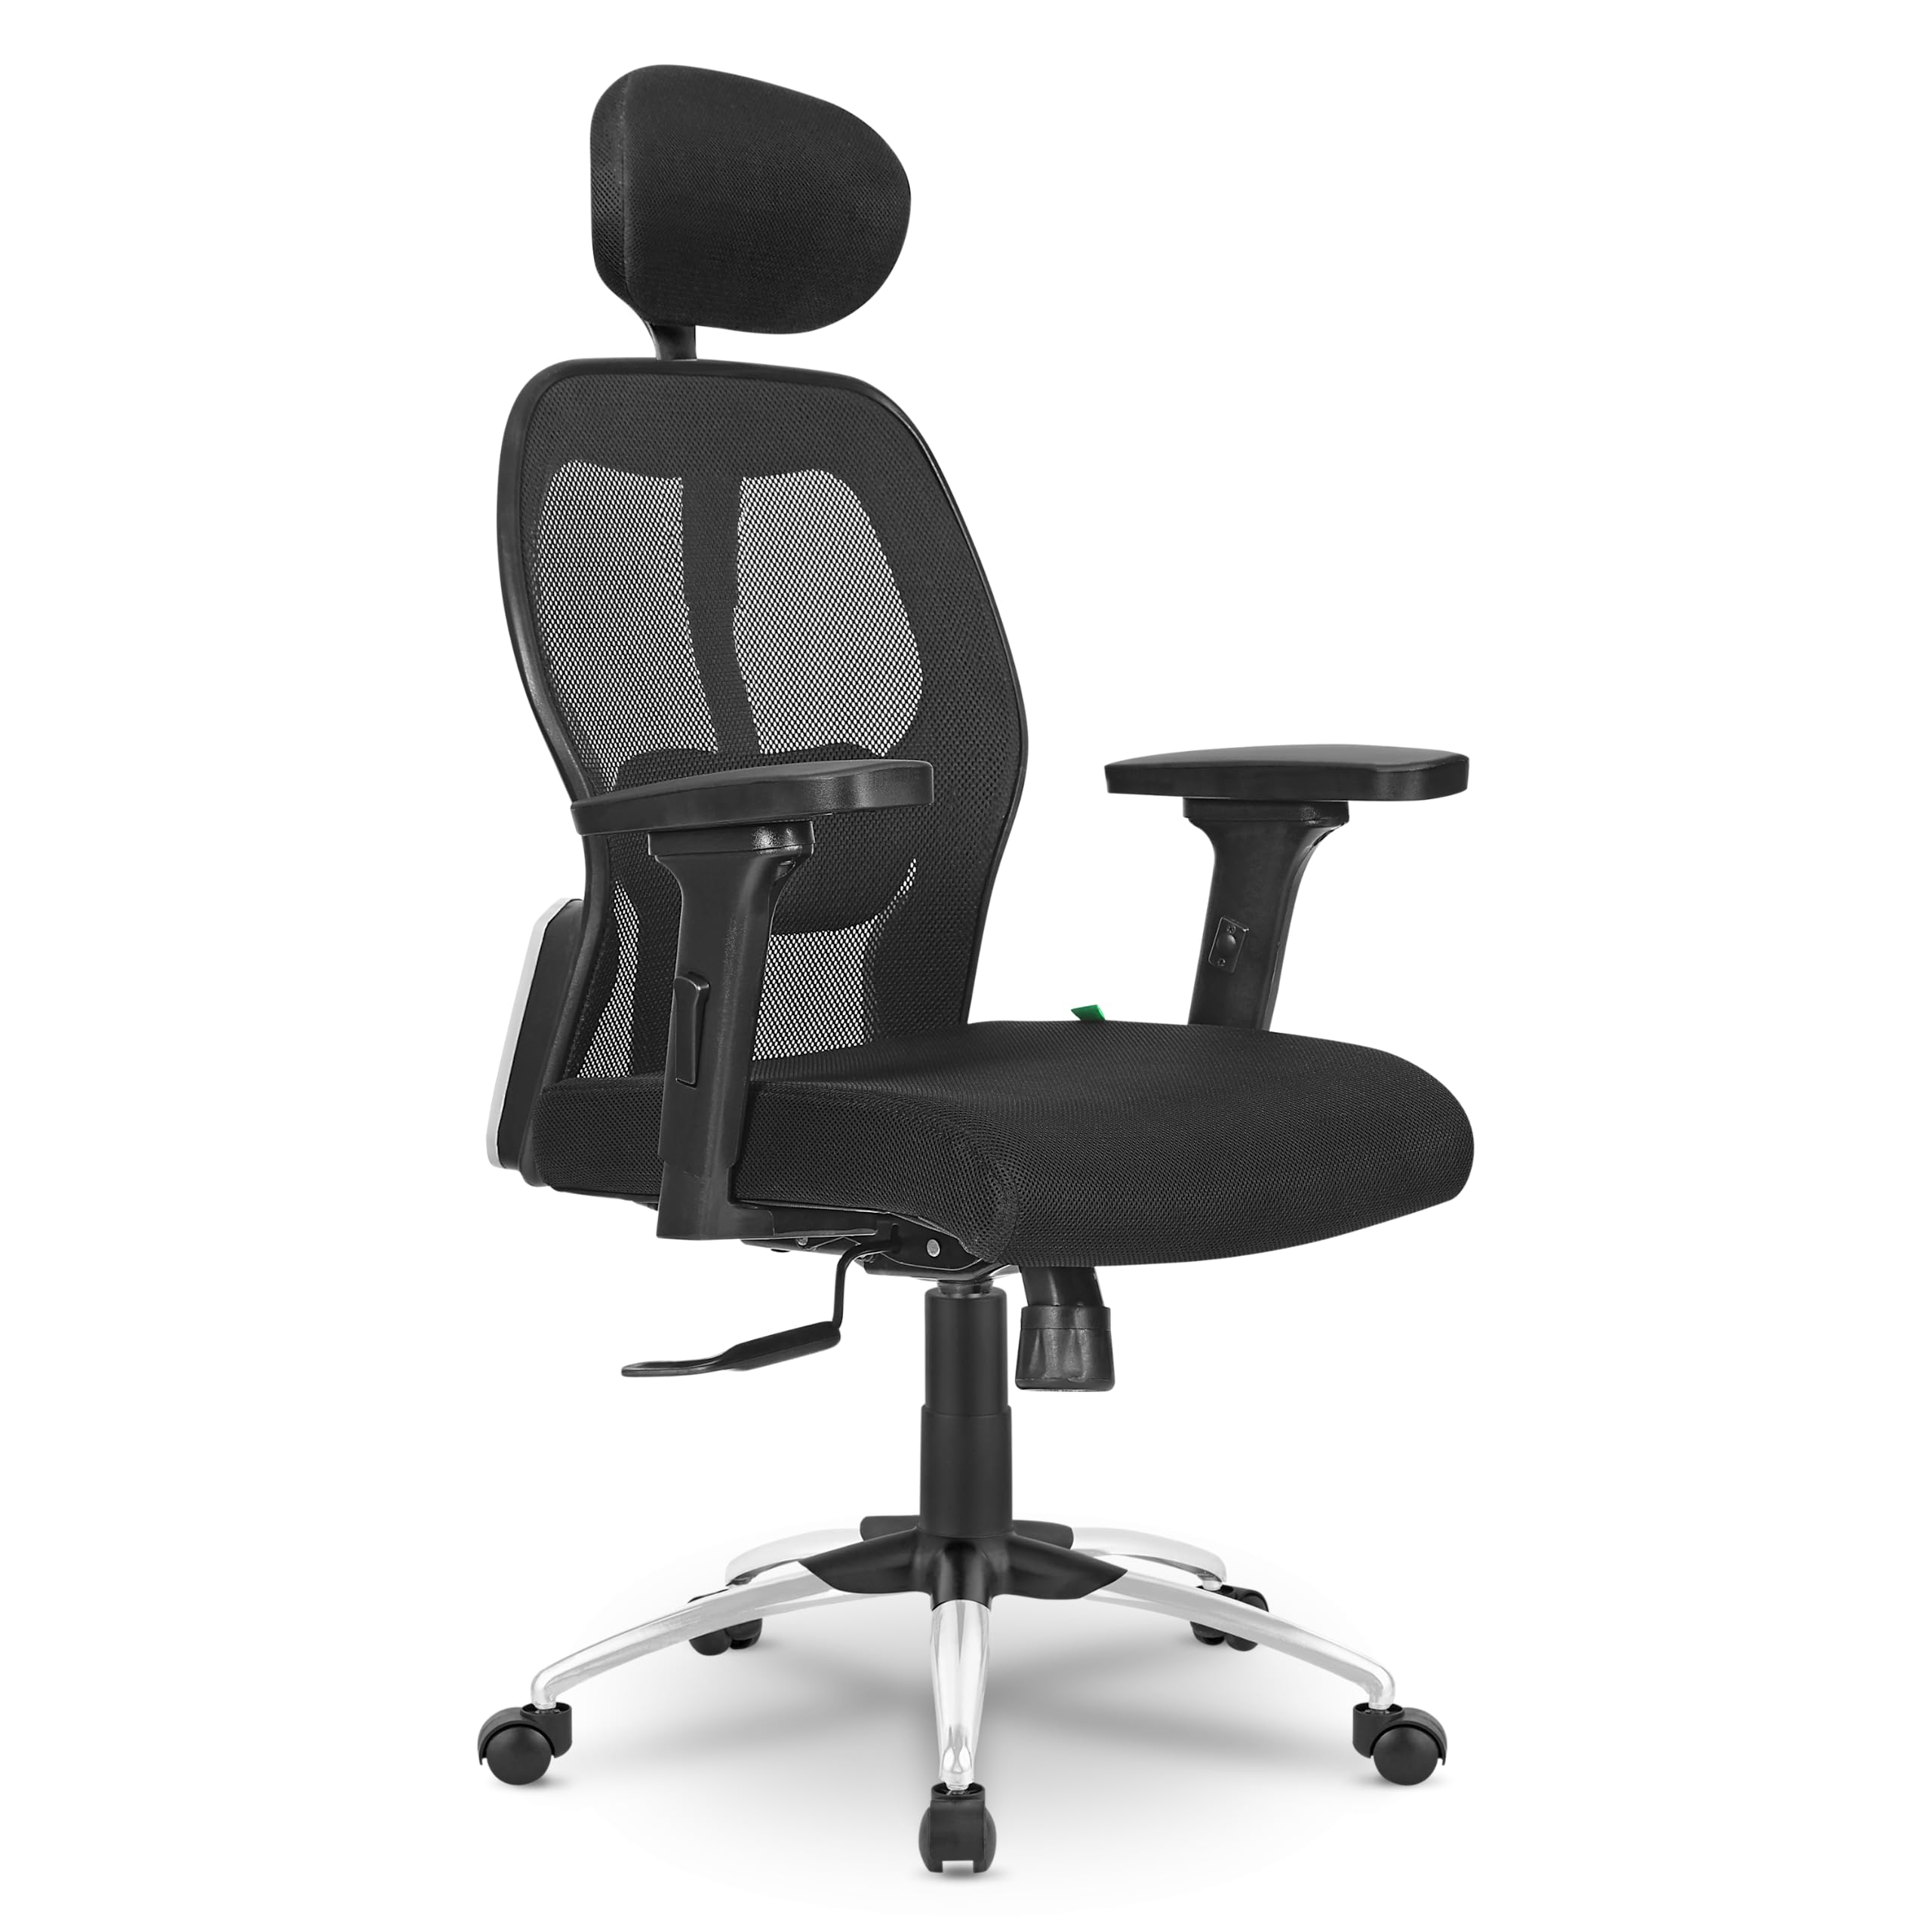 Mesh Ergonomic High Back Office Office Chair With Adjustable Headrest - Alto